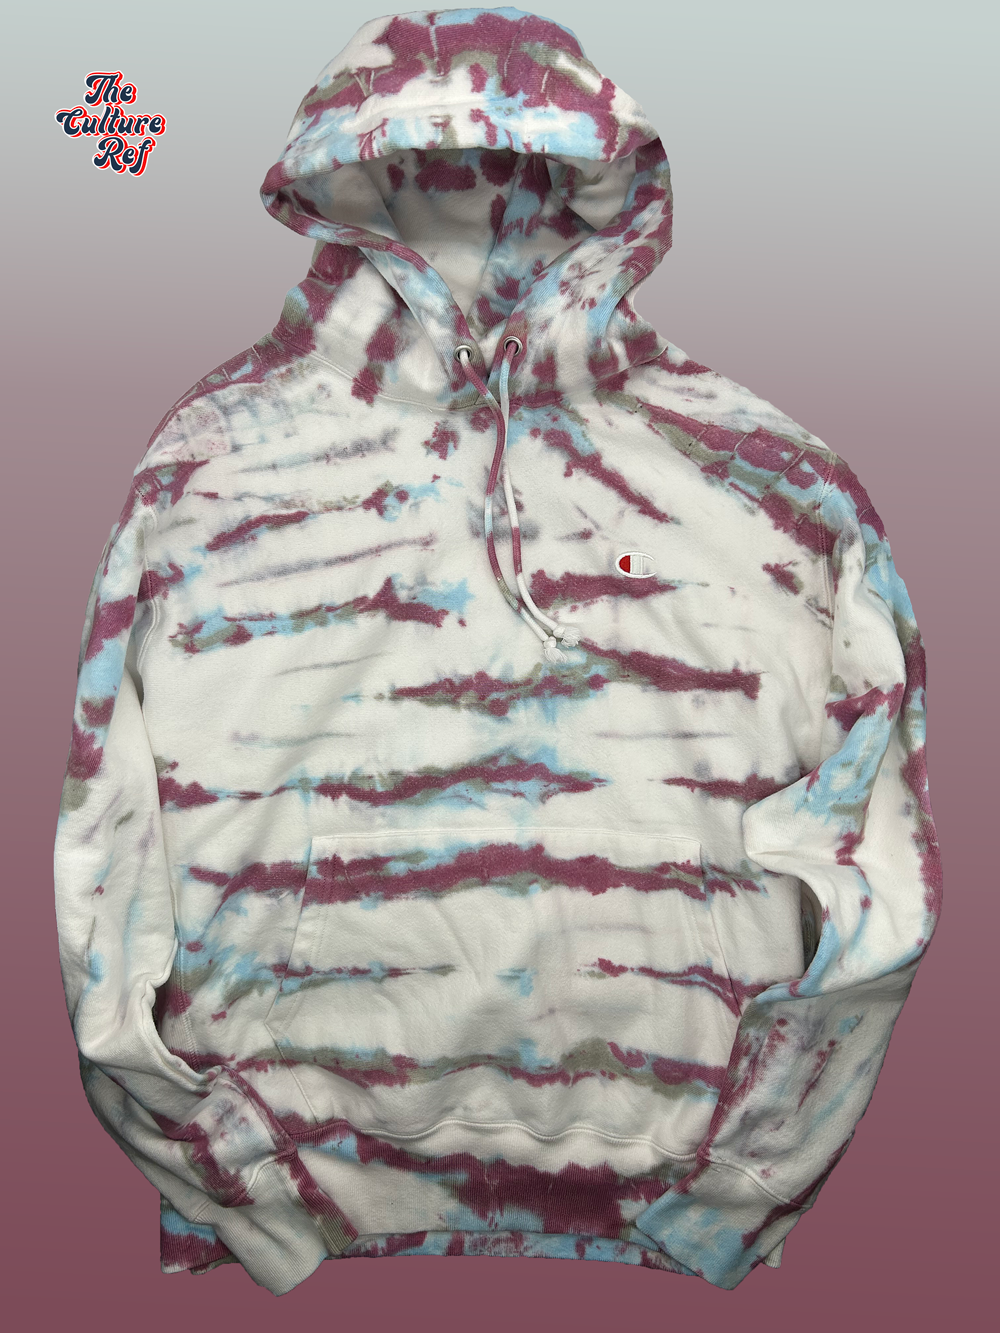 Raspberry Beret - Hand Dyed Hoodie - Champion Reverse Weave | The Culture Ref Official Tie Dye Limited Series